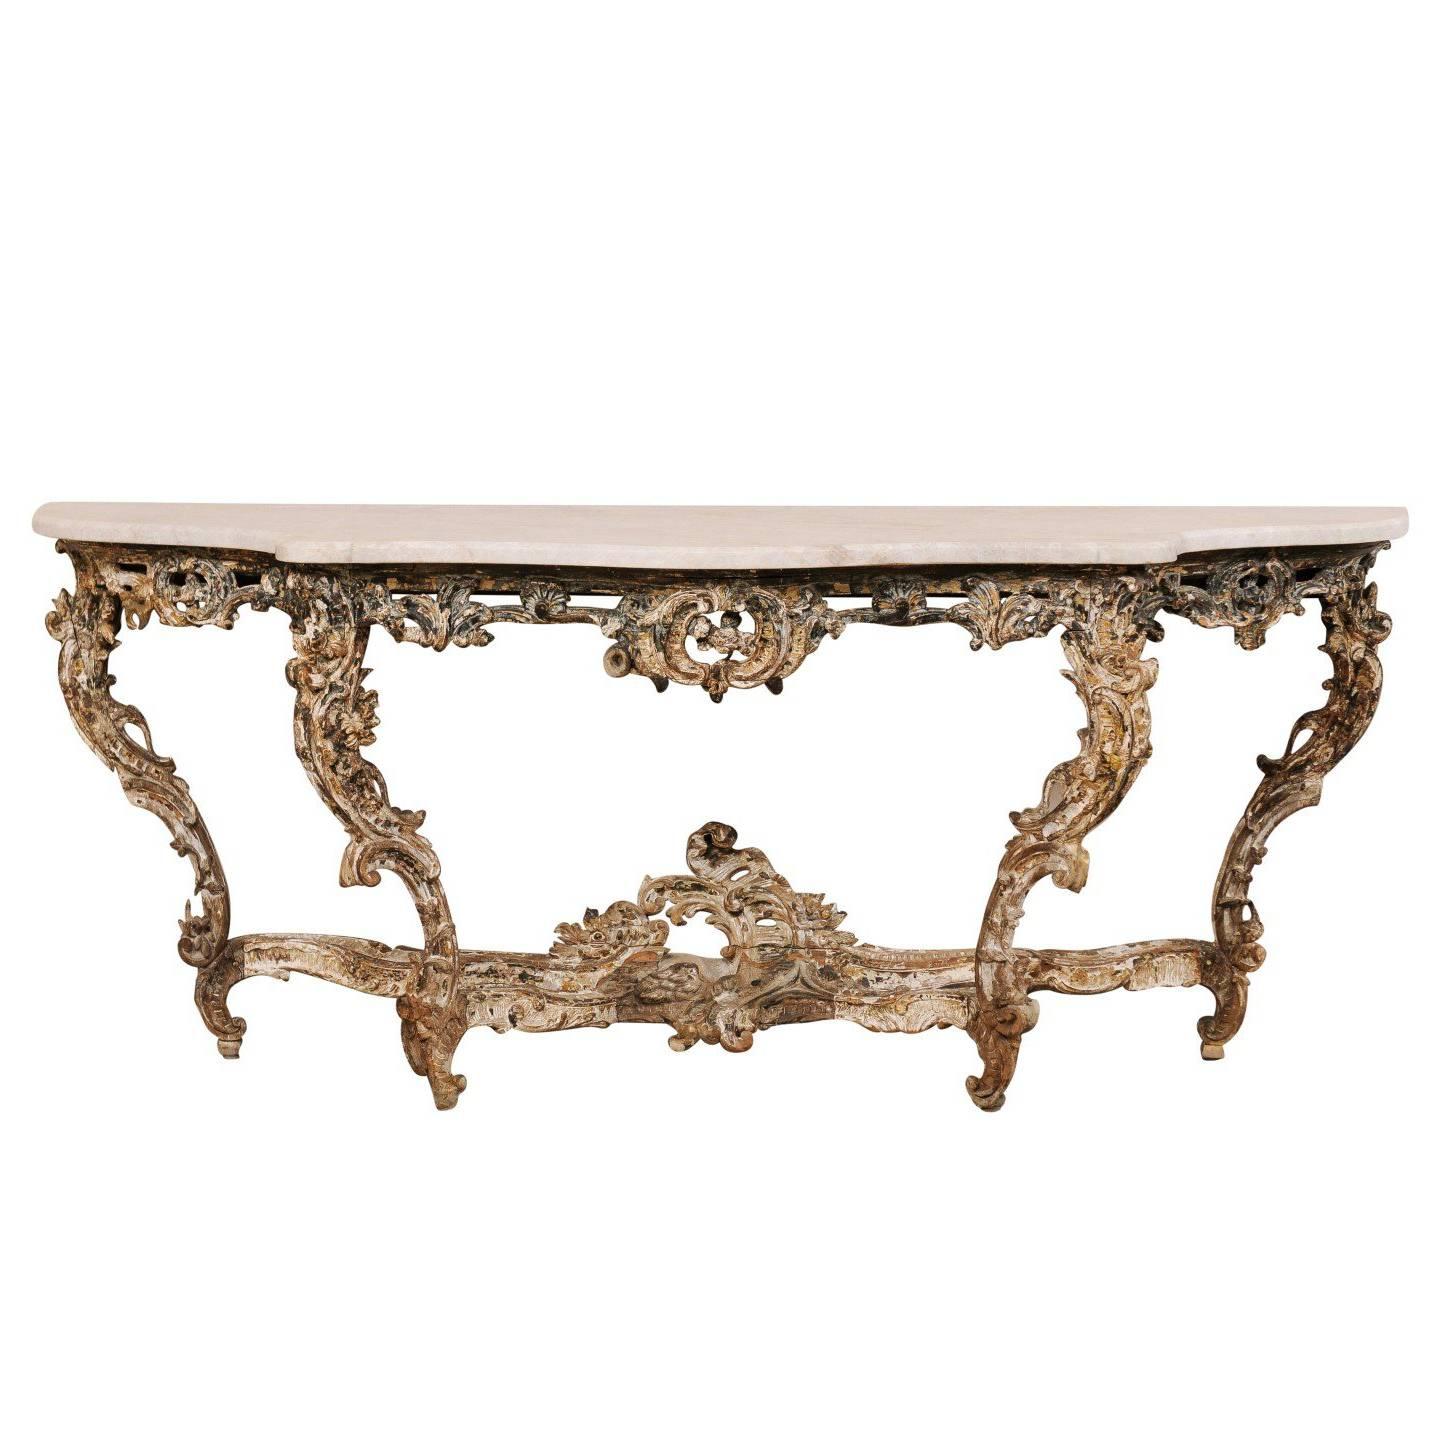 Exquisite French 18th Century Richly Carved Wood and Marble Rococo Console Table